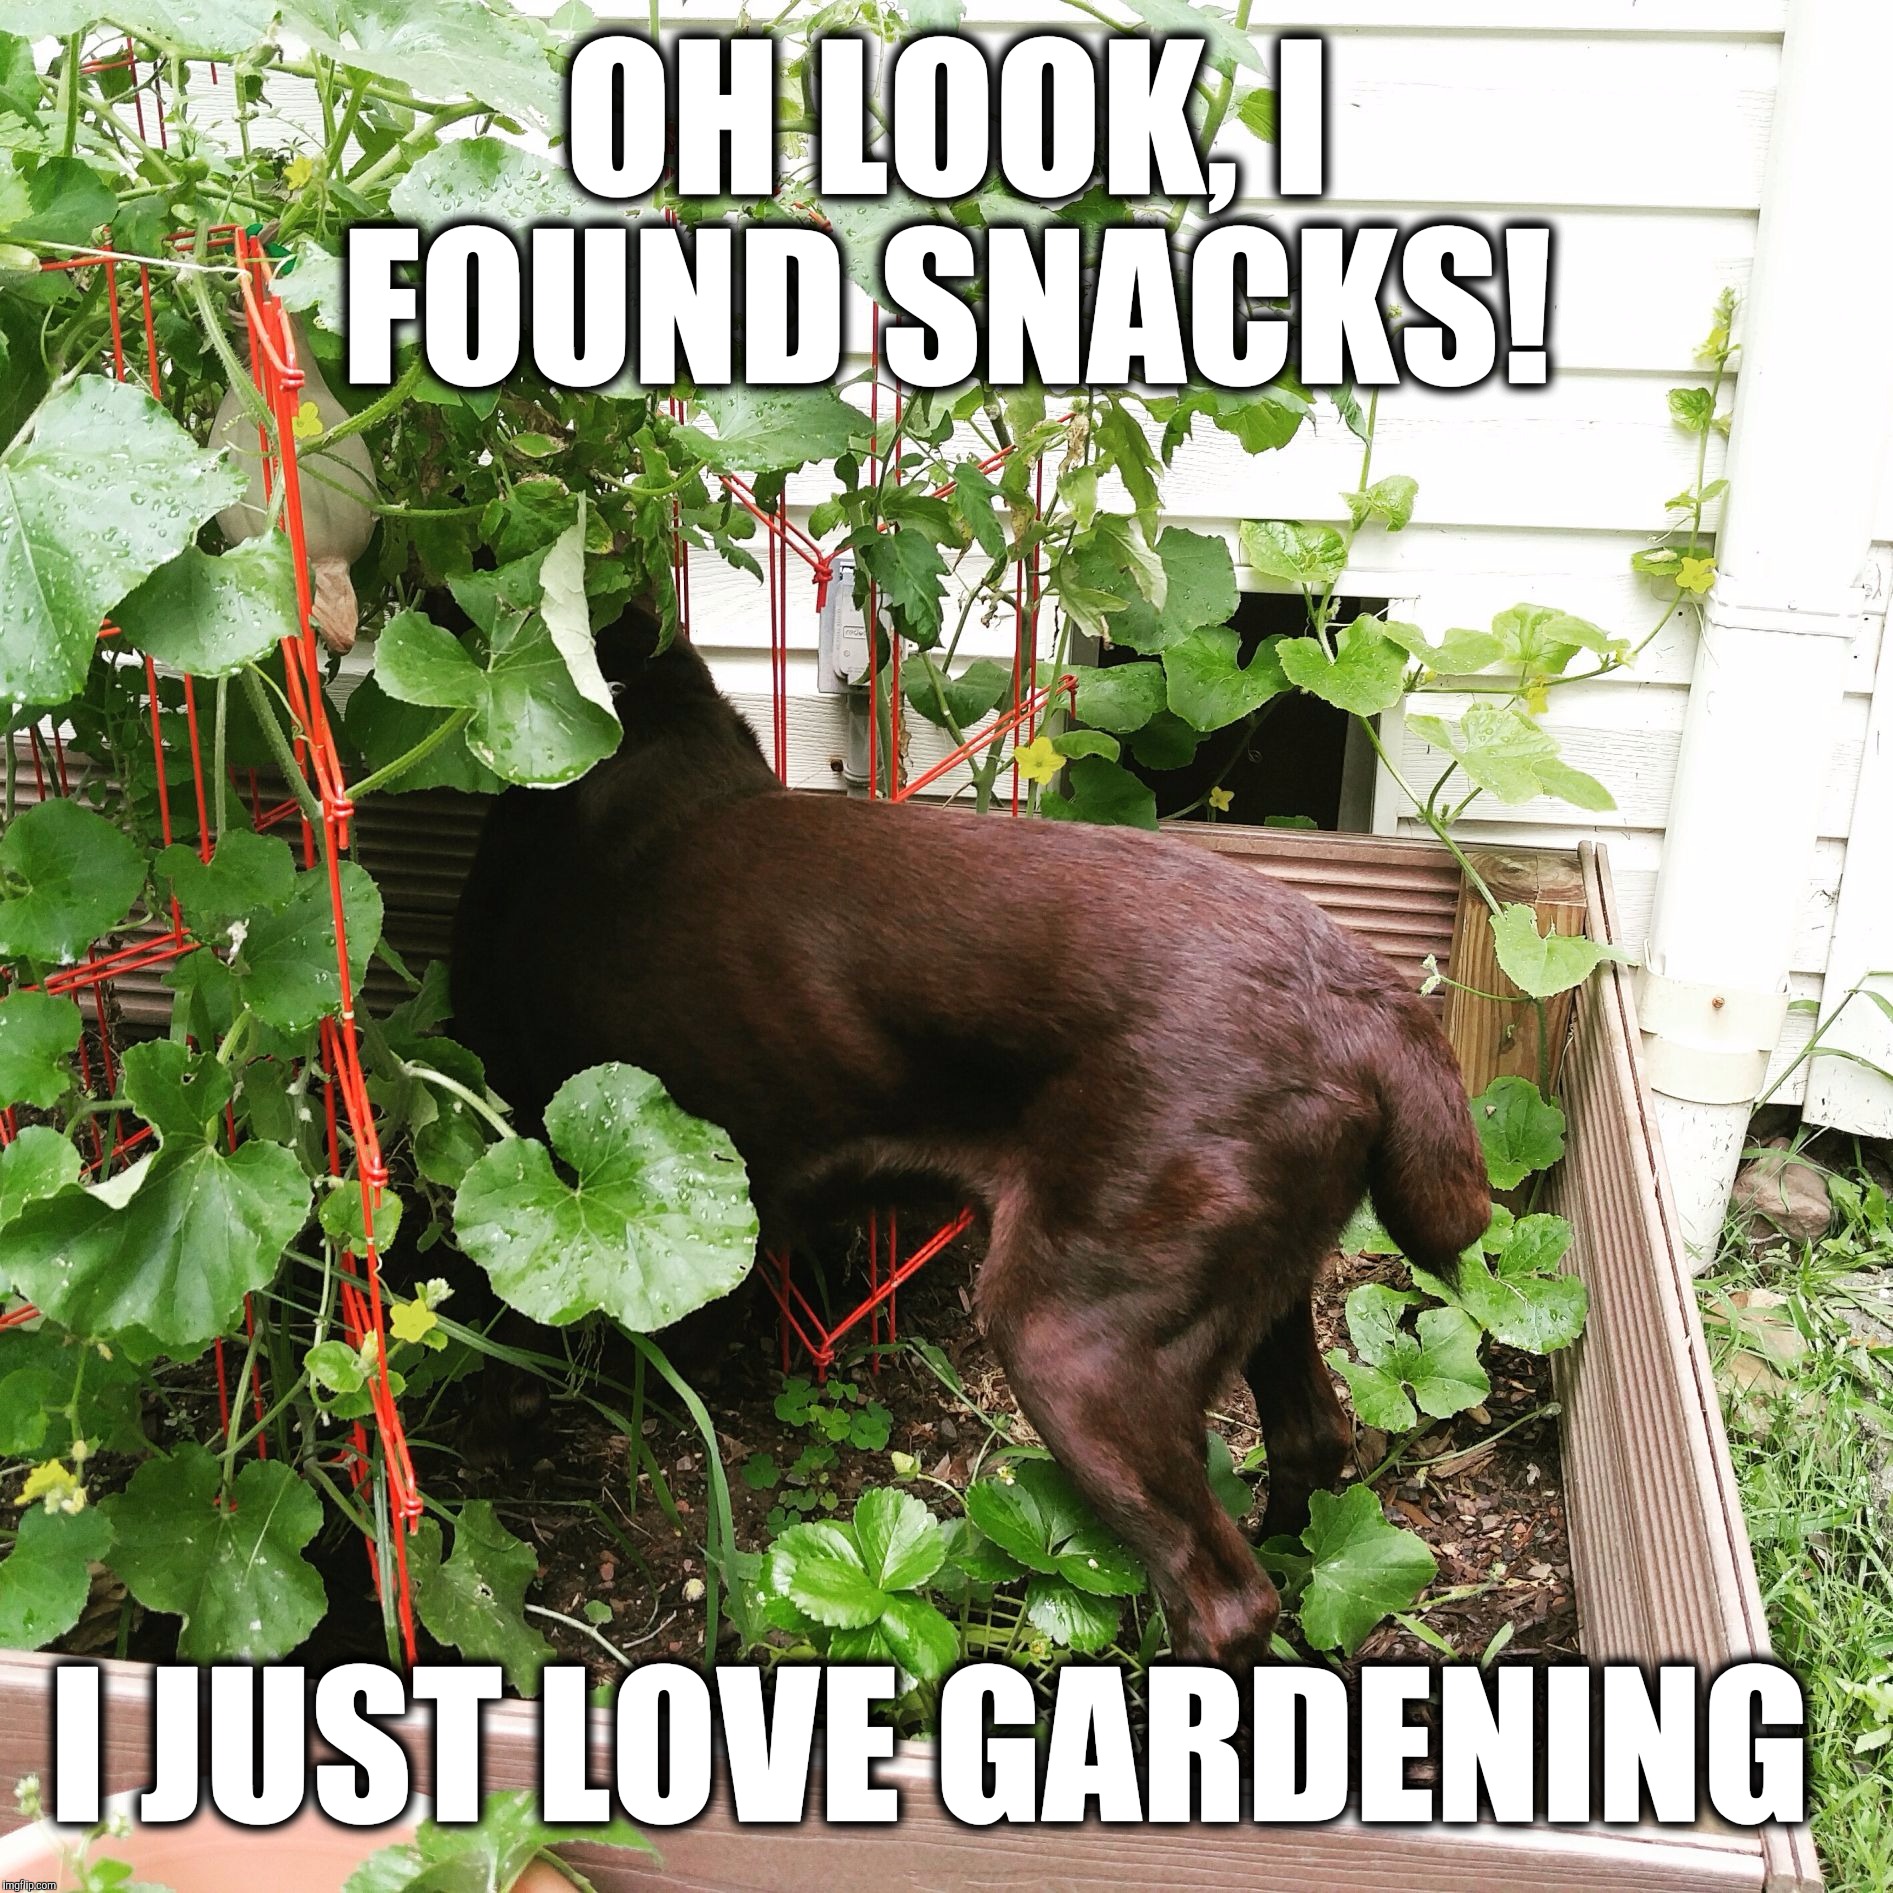 I love gardening!  | OH LOOK, I FOUND SNACKS! I JUST LOVE GARDENING | image tagged in chuckie the chocolate lab,gardening,dog,funny memes,funny,labrador | made w/ Imgflip meme maker